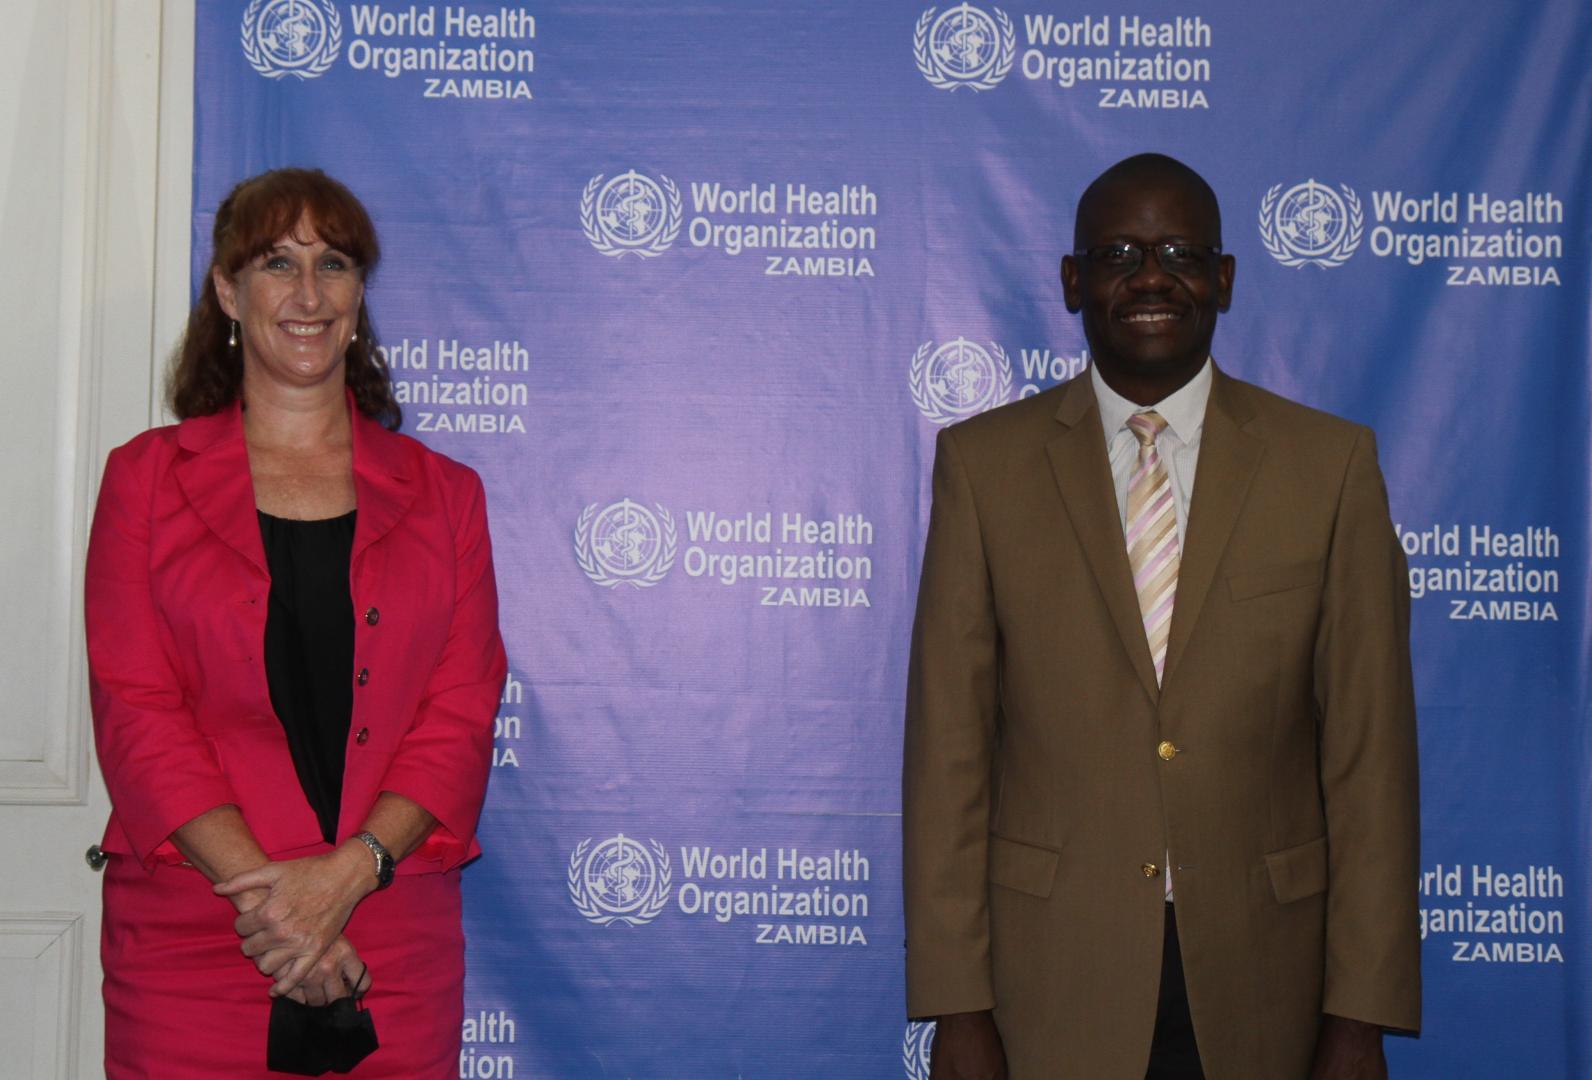 Canada Funded ACT-A Health Systems Connector implementation supports WHO and MoH COVID-19 Response and Continuity of Health Services in Zambia